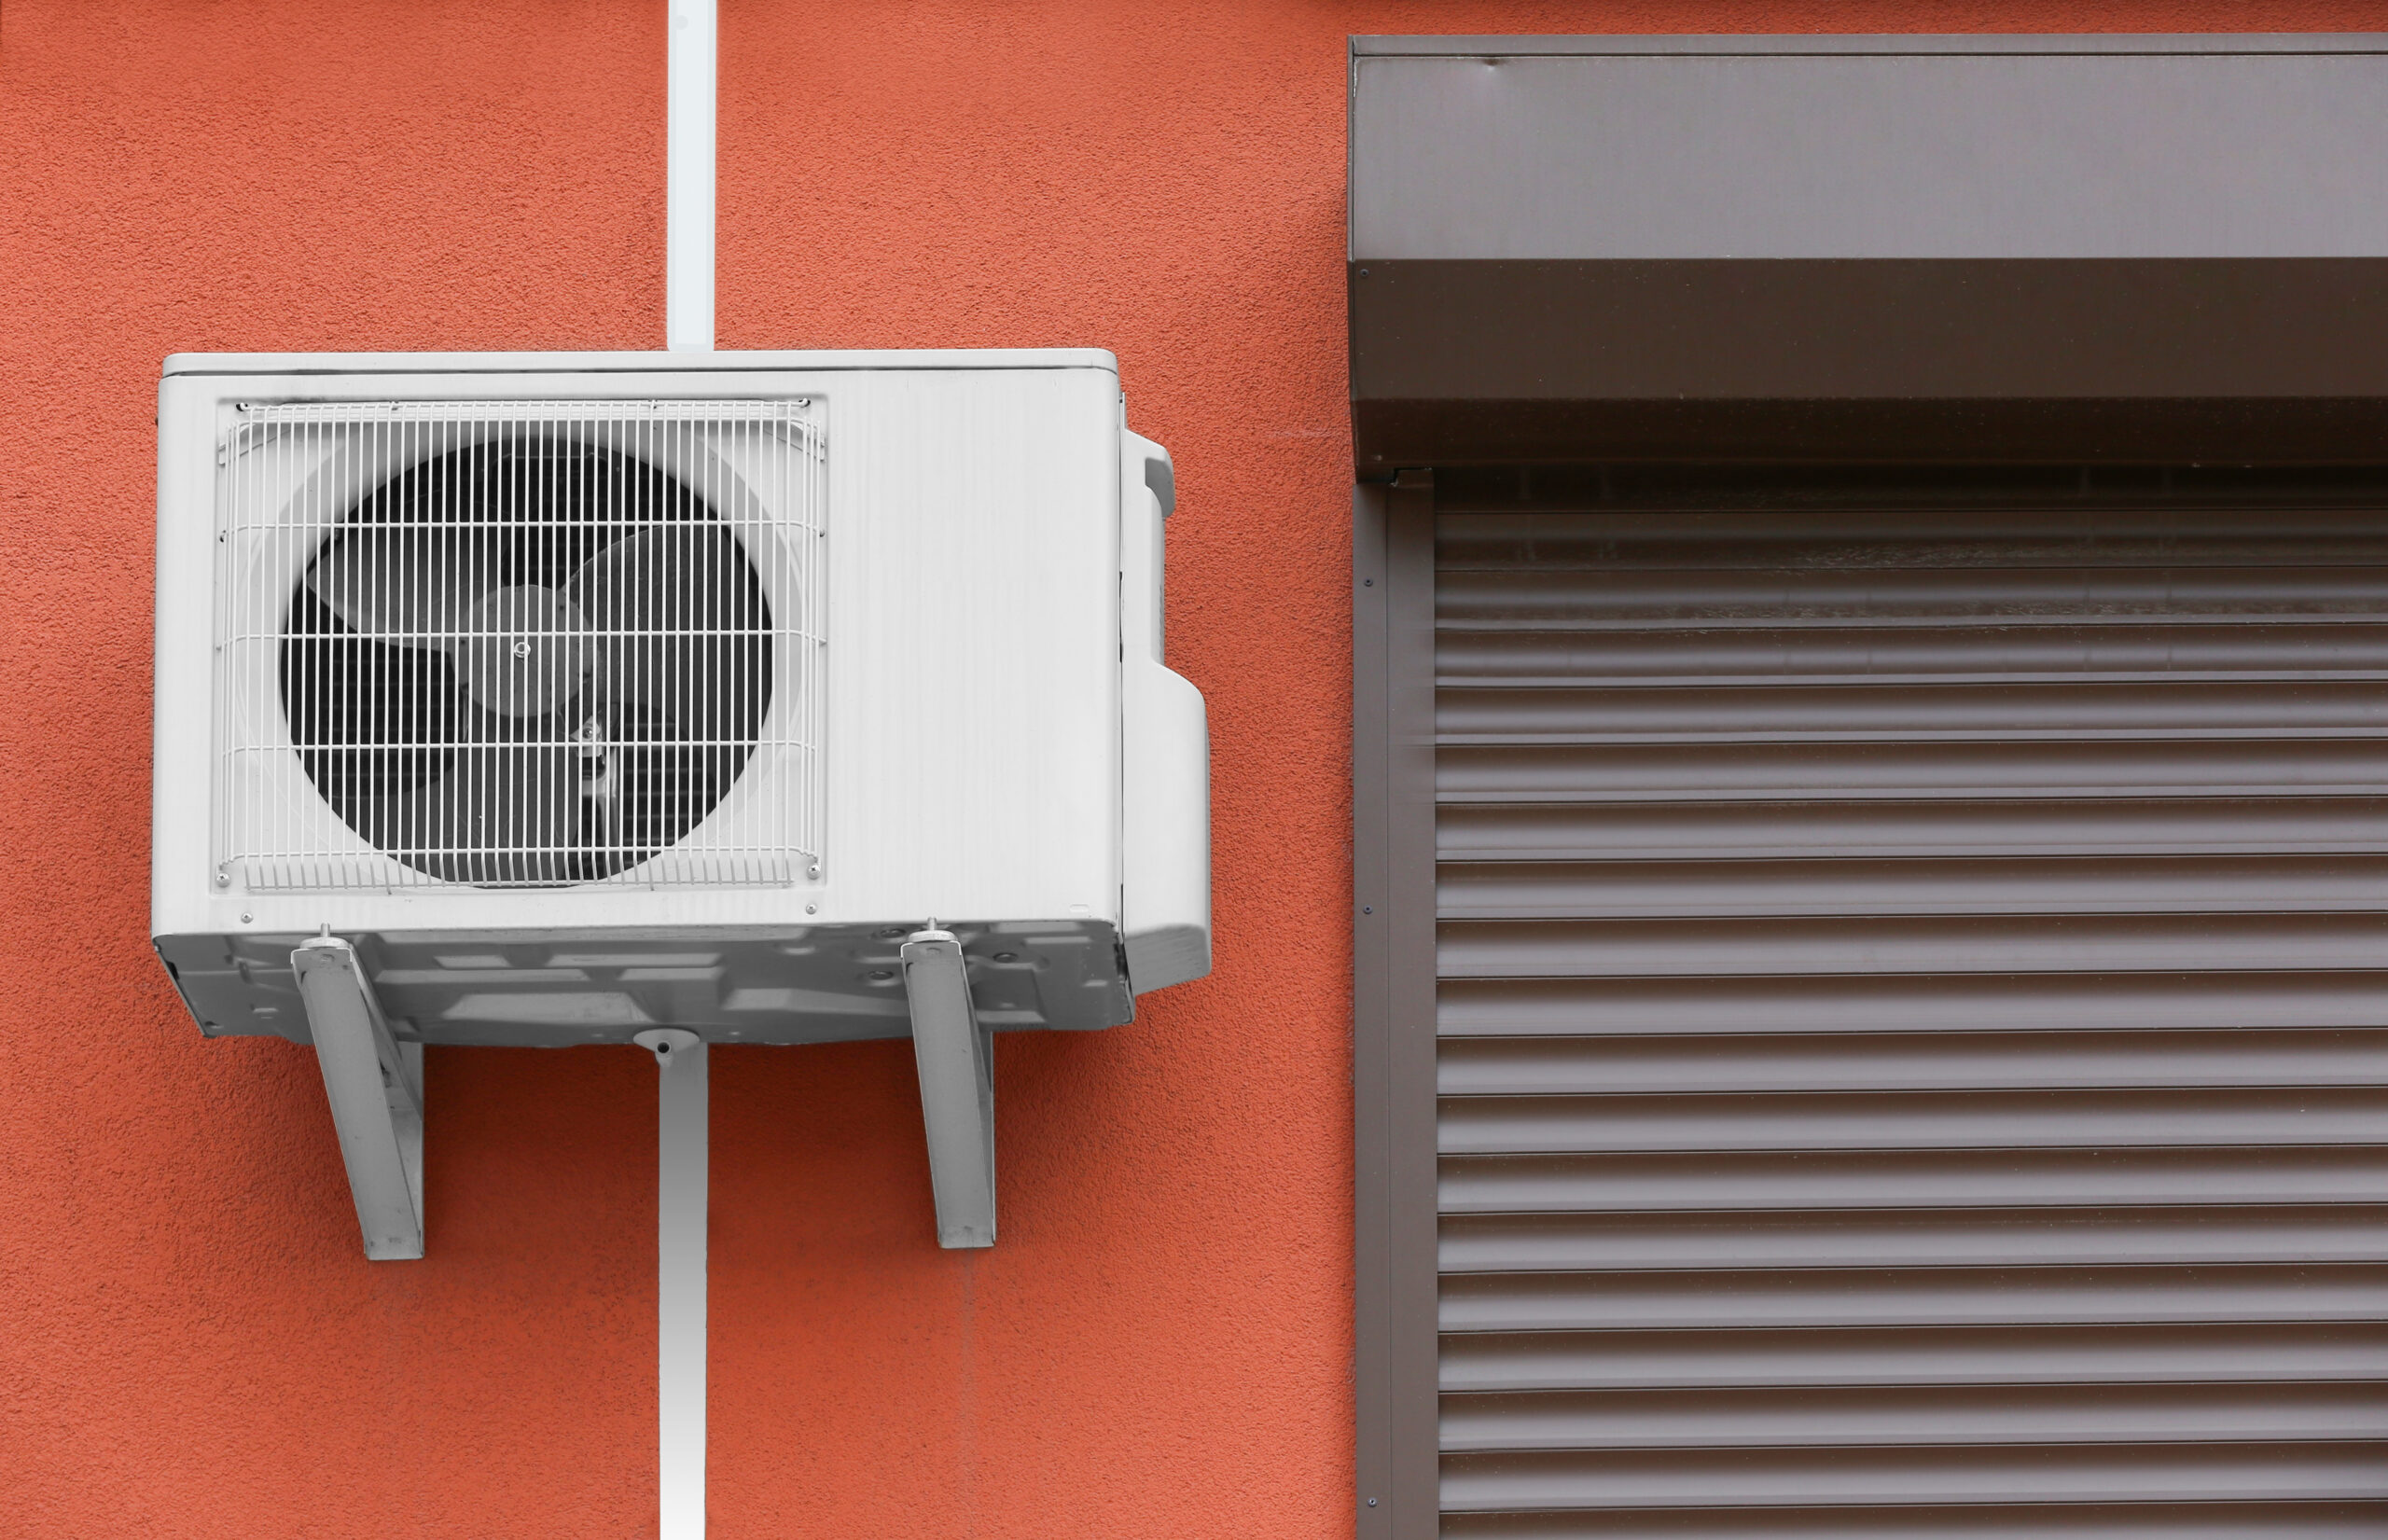 HOW TO PICK THE RIGHT AC UNIT